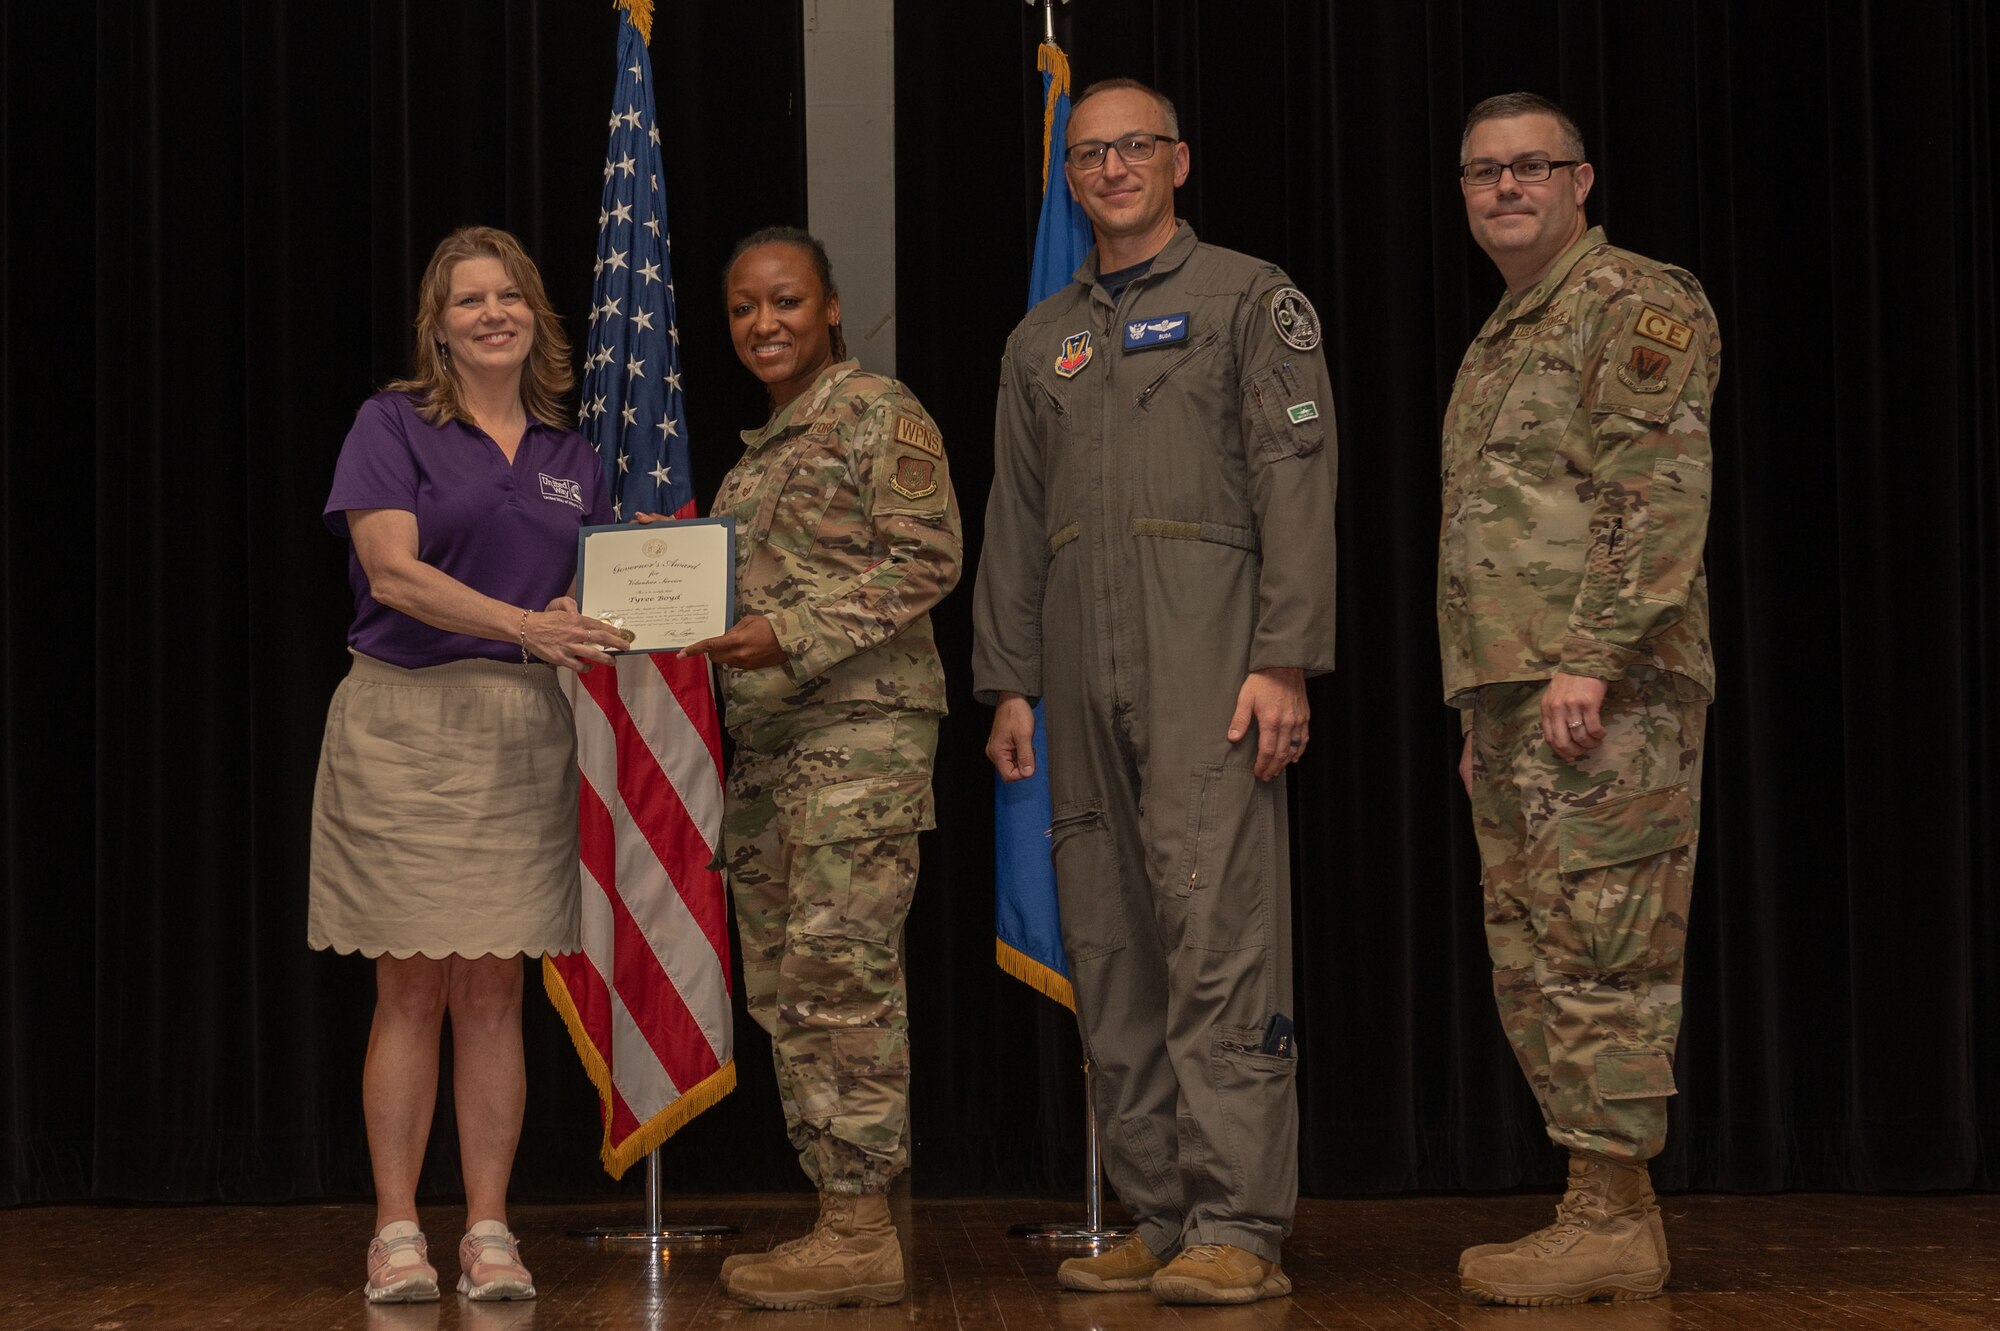 Col. Steven Bofferding, 4th Fighter Wing vice commander, Chief Master Sgt. Kyle O’Hara, right, 4th Civil Engineer Squadron command chief, and Sherry Archibald, left, United Way executive director, present the North Carolina Governor’s Volunteer Service Award to Master Sgt. Tyneka Kearse, 4th Maintenance Group quality inspector, who accepts the award for Senior Airman Tyree Boyd, 4th Maintenance Group weapons system coordinator, during a volunteer appreciation ceremony at Seymour Johnson Air Force Base, North Carolina, April 21, 2023. This award honors the true spirit of volunteerism by recognizing individuals, groups and businesses that make a significant contribution to their community through volunteer service. (U.S. Air Force photo by Airman 1st Class Rebecca Sirimarco-Lang)